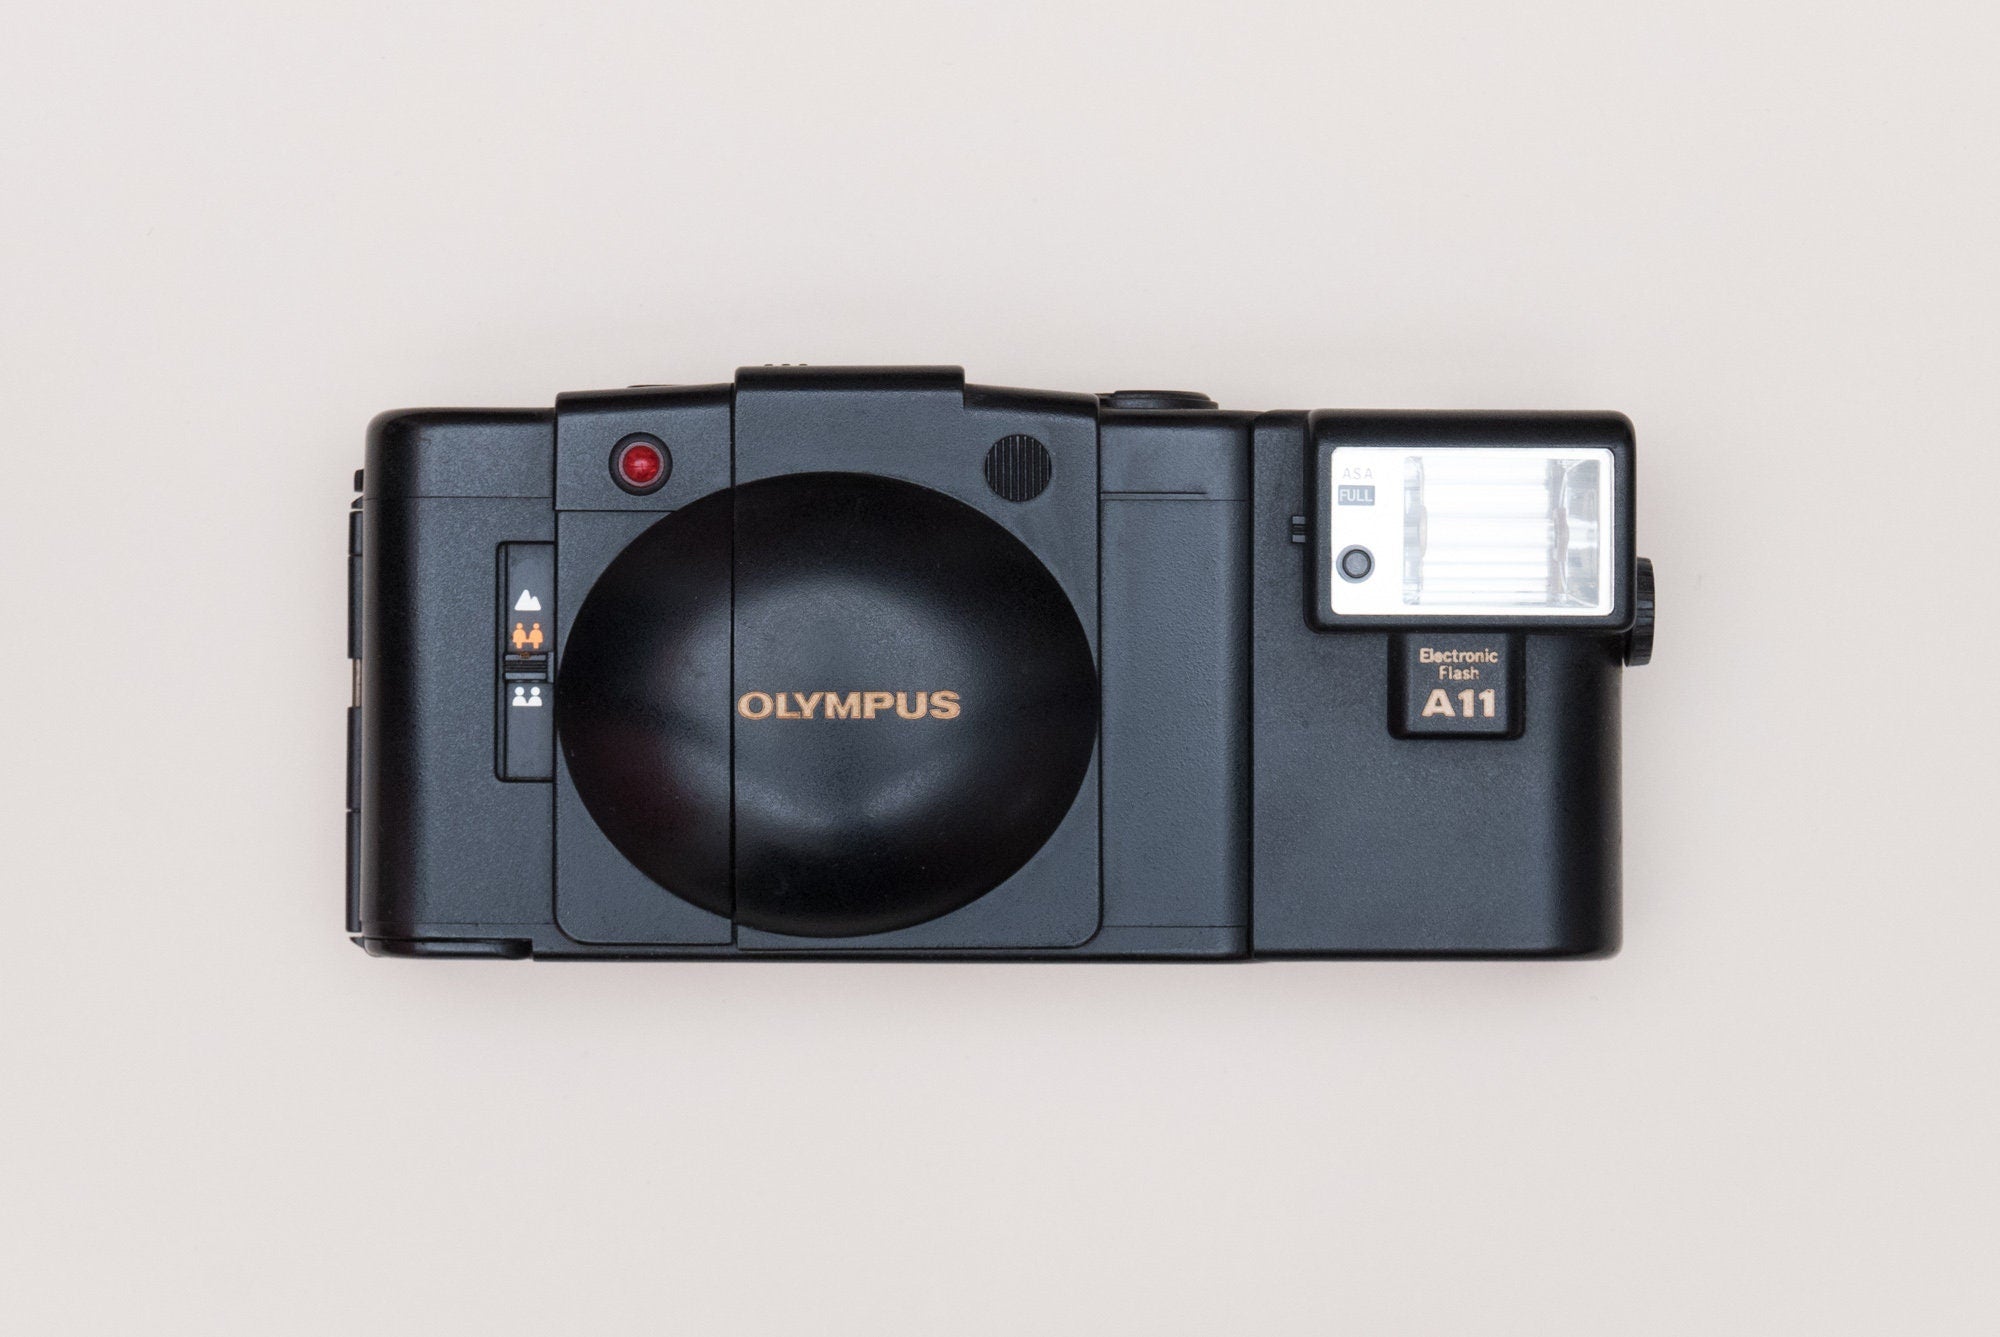 Olympus XA 2 Compact Film Camera with Zuiko 3.5/35mm lens and A11 Flas